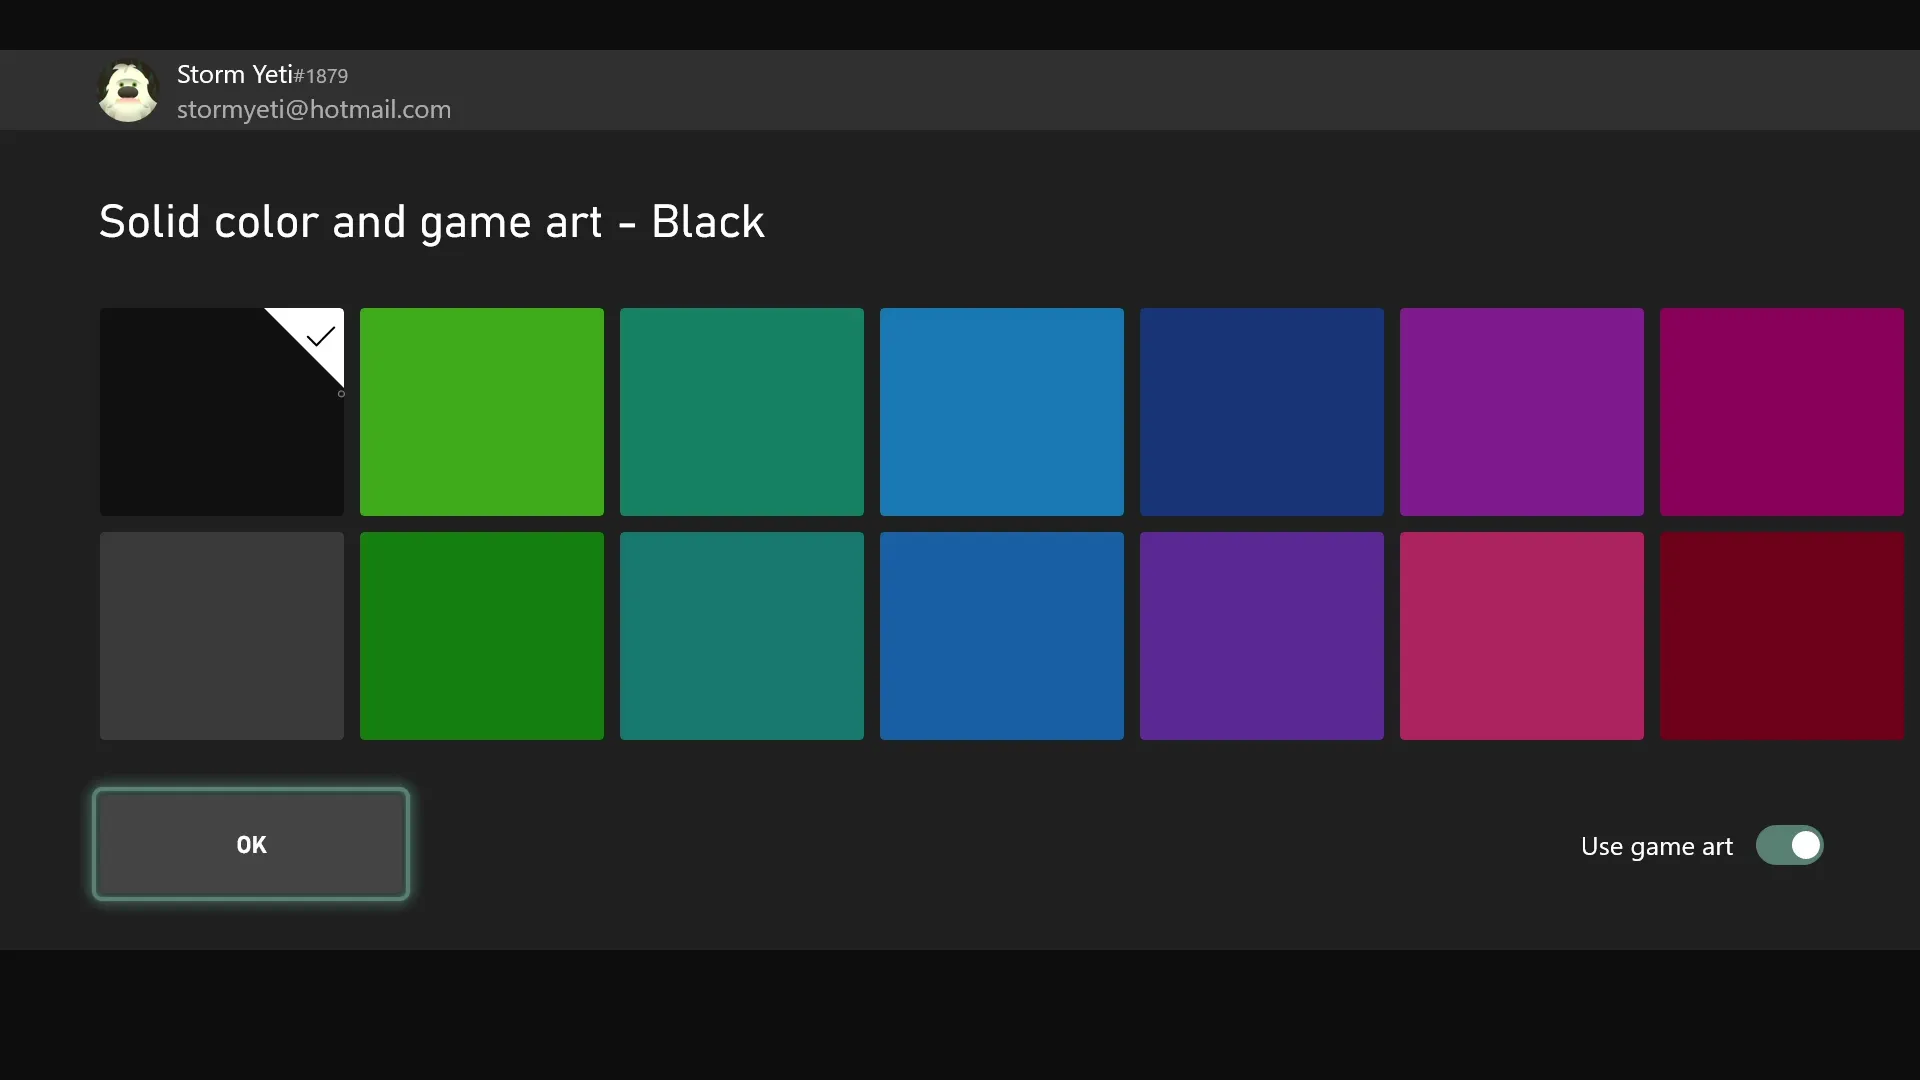 New Solid color and game art option on Xbox consoles